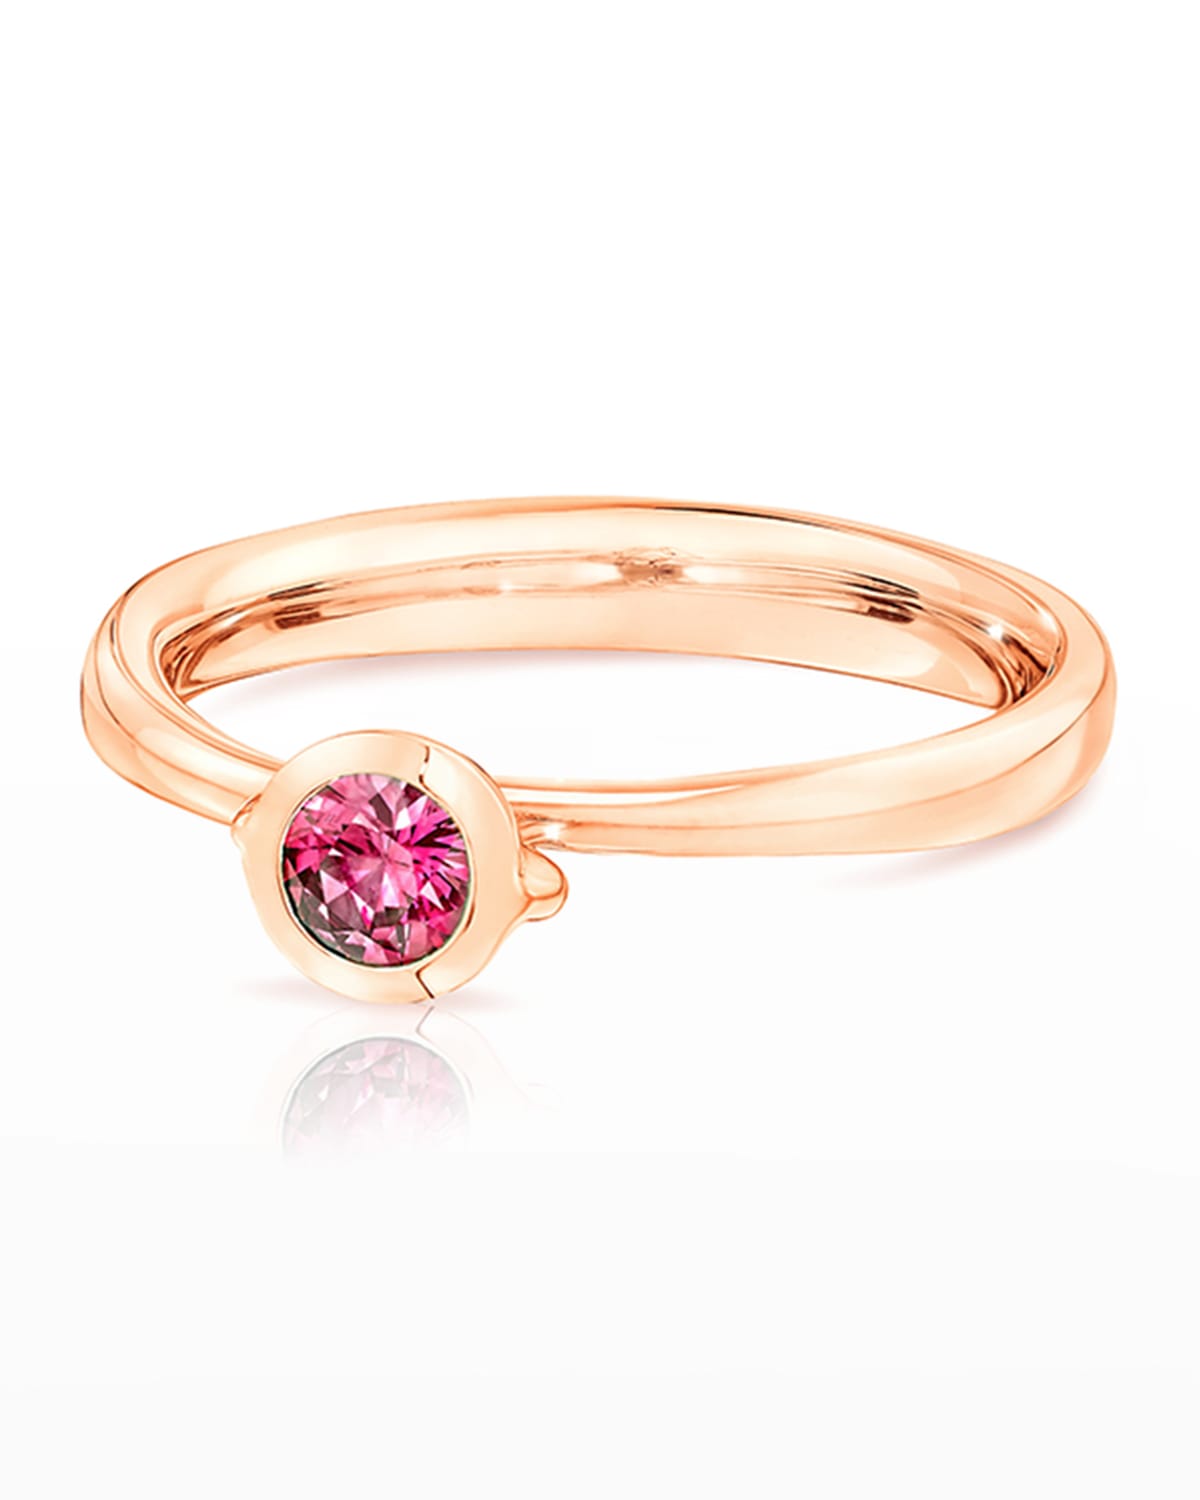 18k Rose Gold Pink Spinel Solitaire Ring, Size 6.5